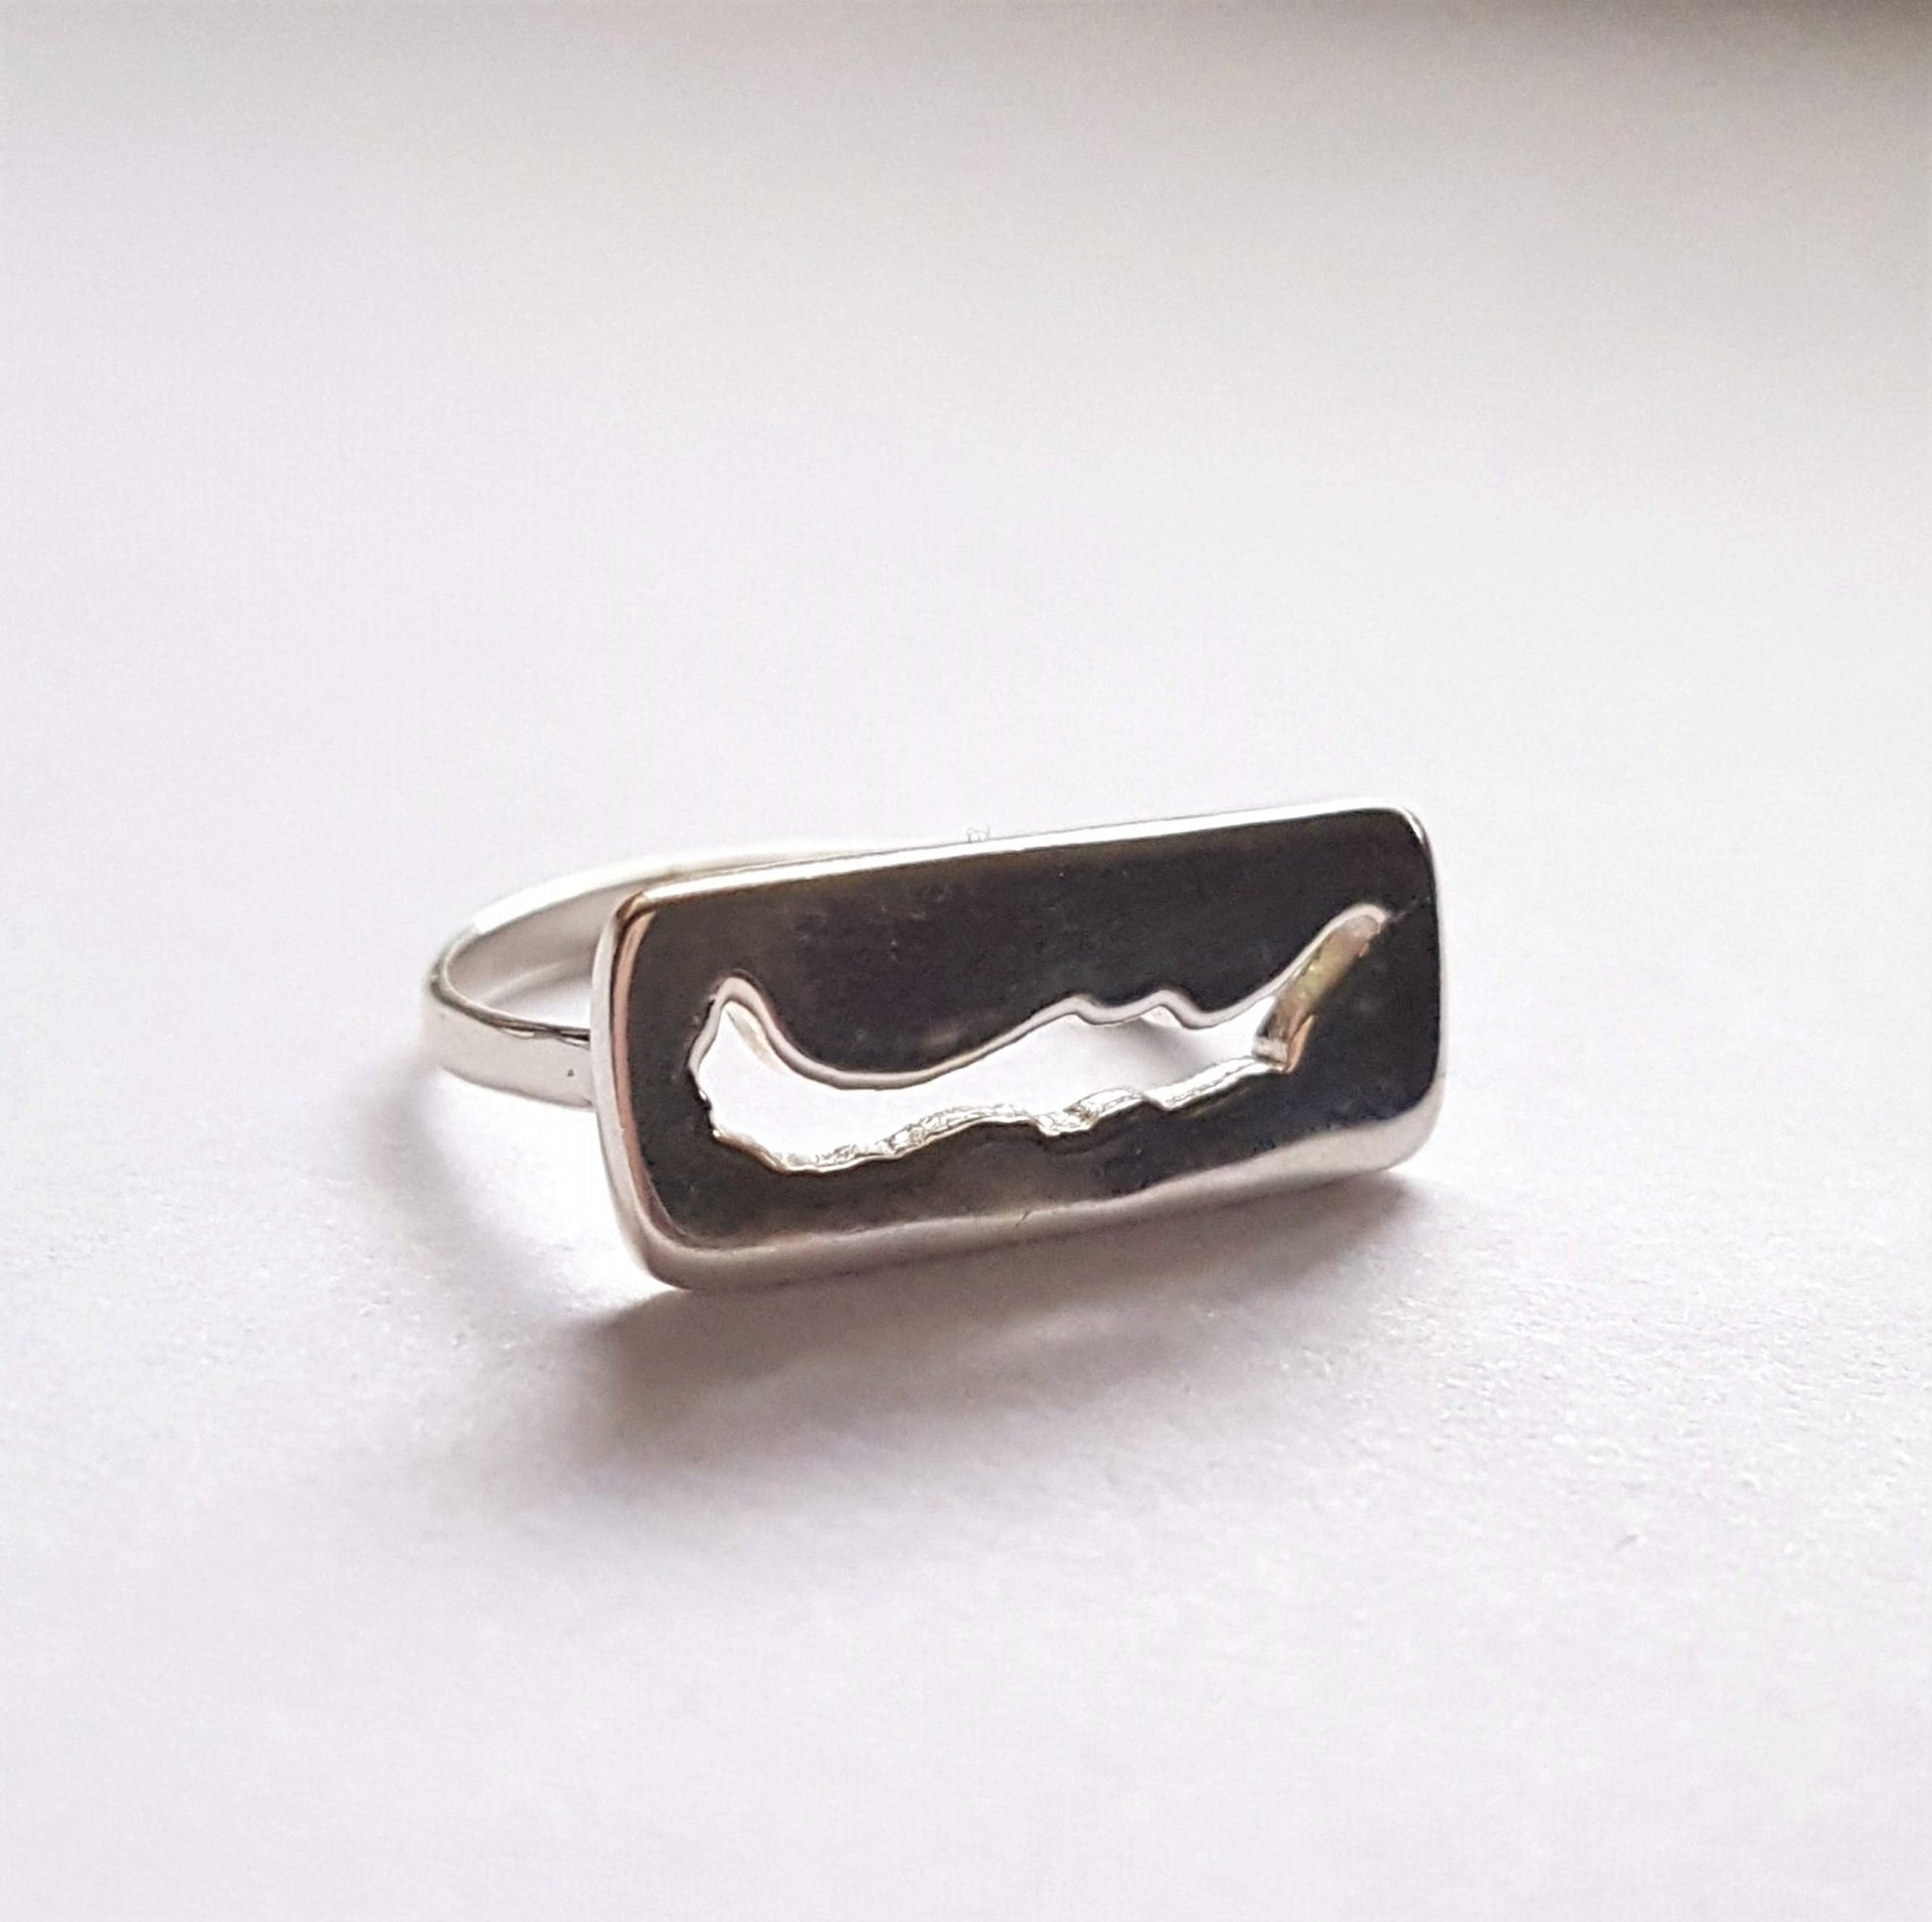 Savary island jewelry. sterling silver ring with rectangle insignia with savary island shape cut out